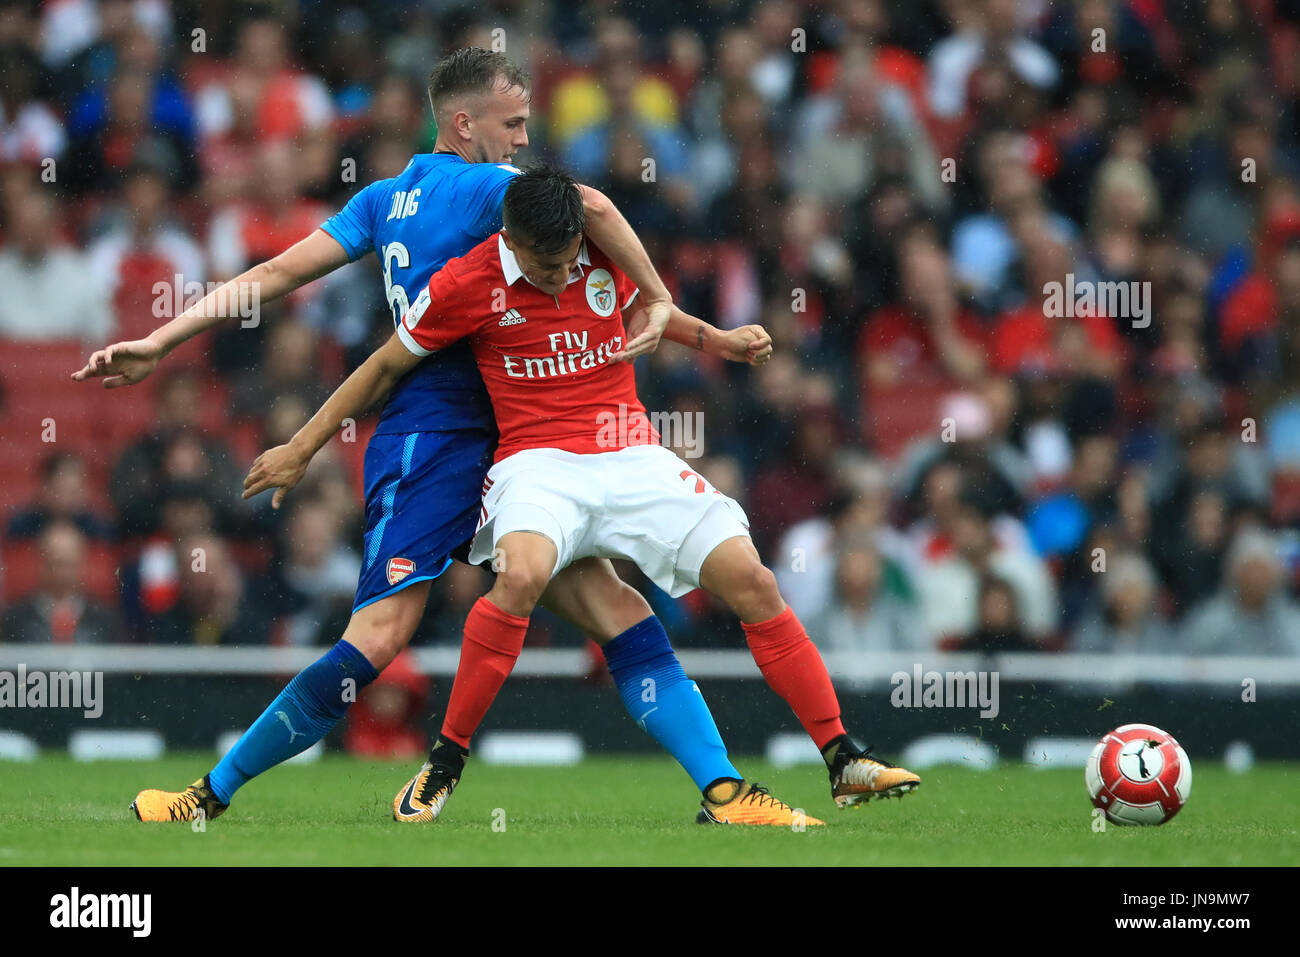 Benfica's Franco Cervi (left) and Arsenal's Rob Holding battle for the ball during the Emirates Cup match at the Emirates Stadium, London. Stock Photo